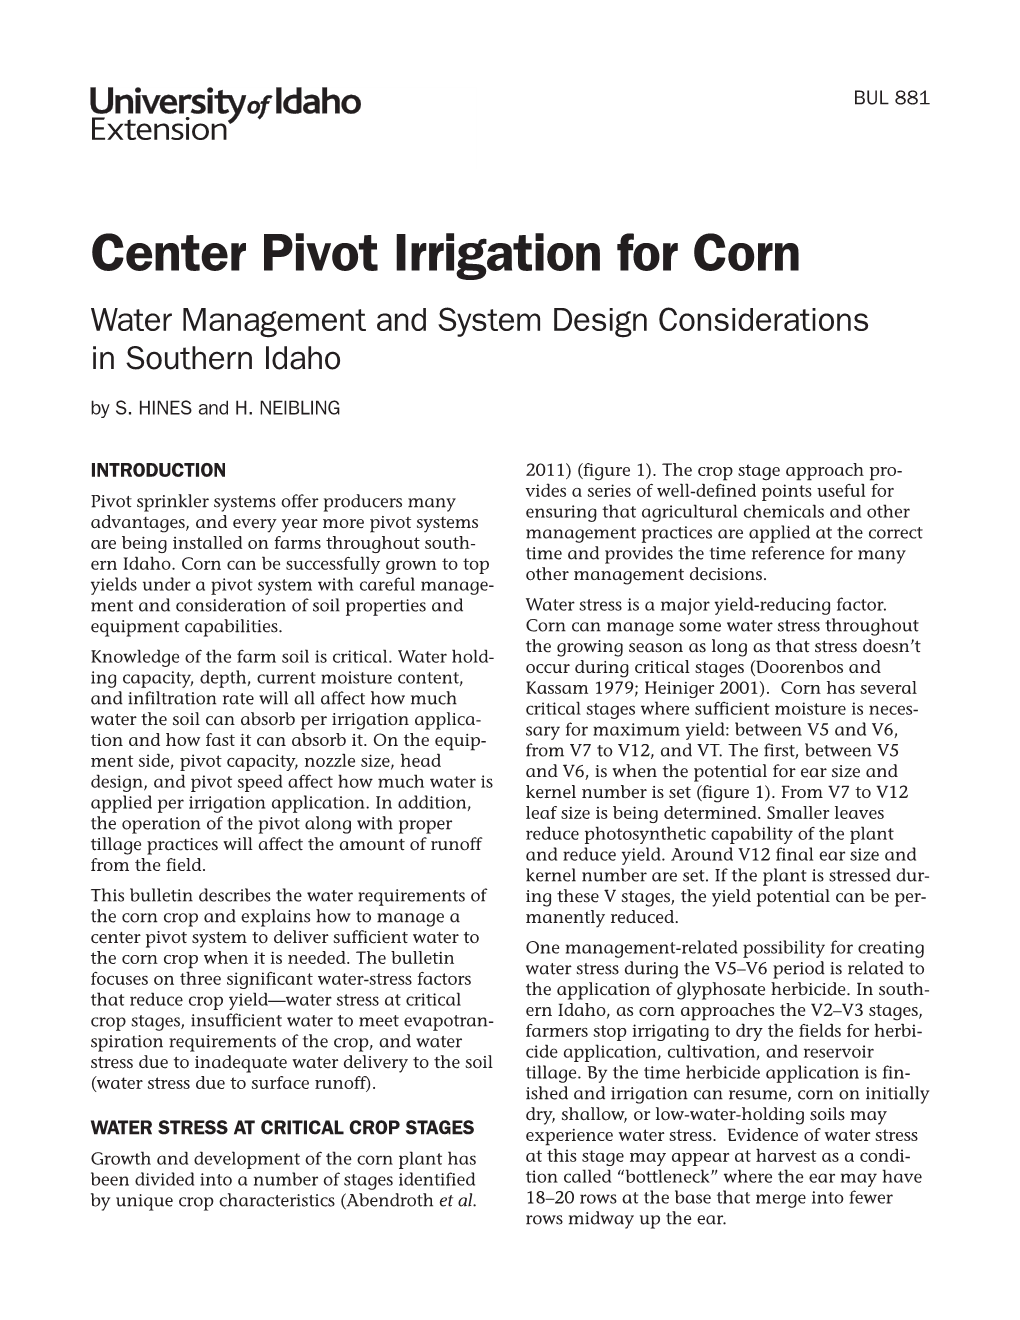 Center Pivot Irrigation for Corn Water Management and System Design Considerations in Southern Idaho